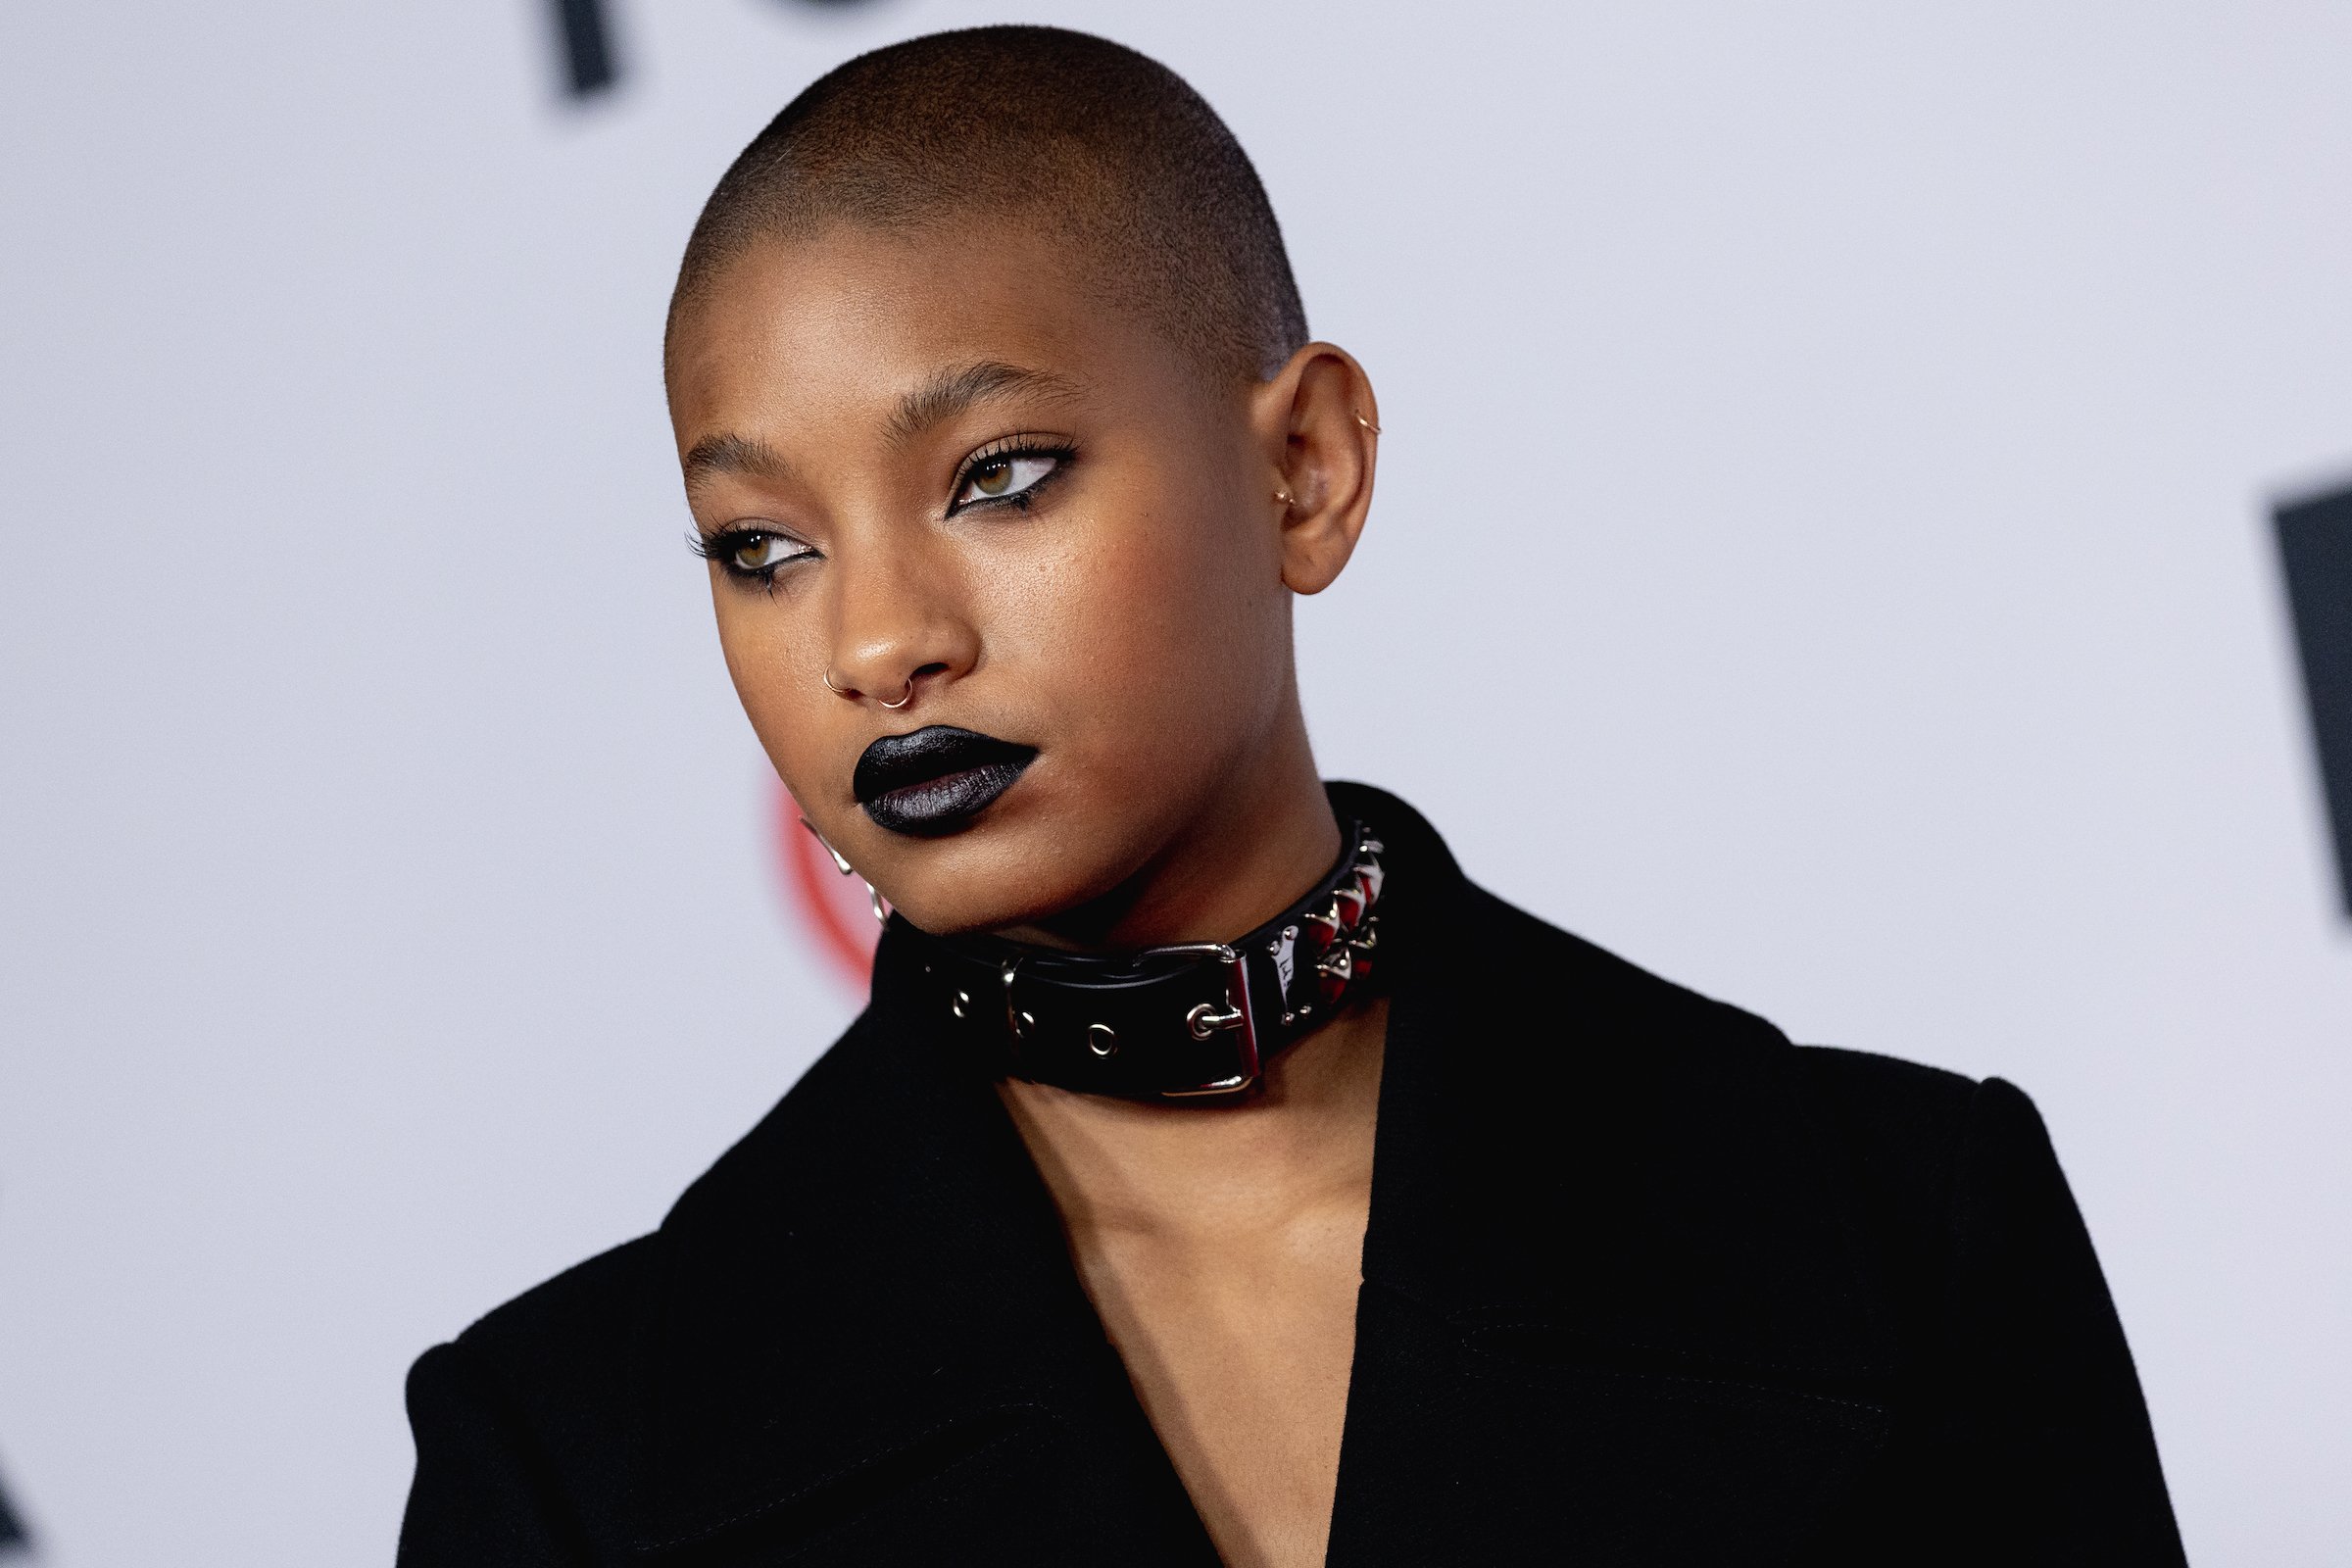 Willow Smith Addressed Her Father Will Smith’s Infamous Chris Rock Oscars Slap